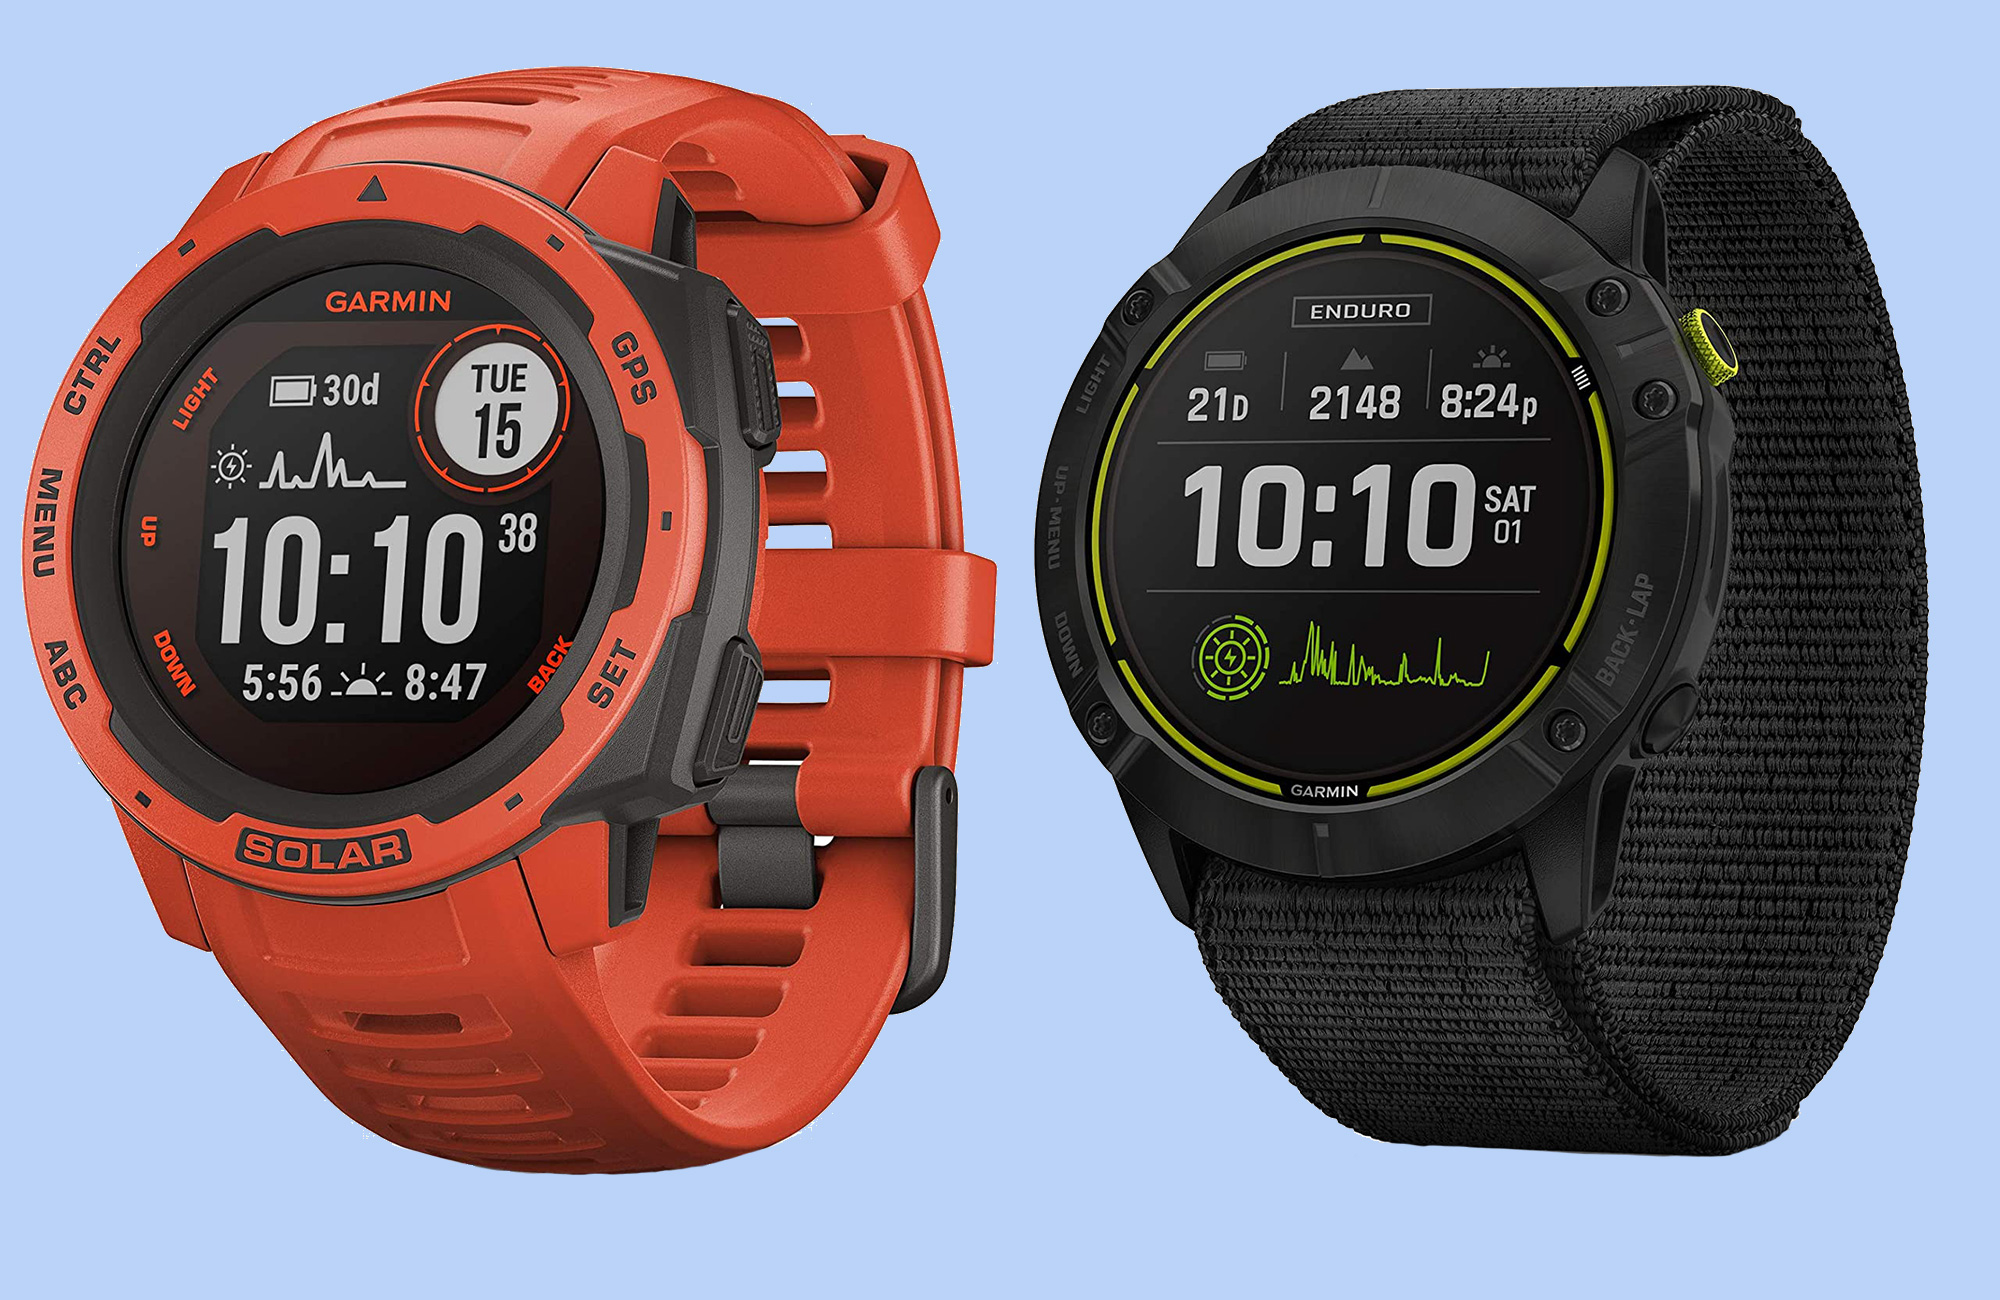 The best Prime Day deals on Garmin watches